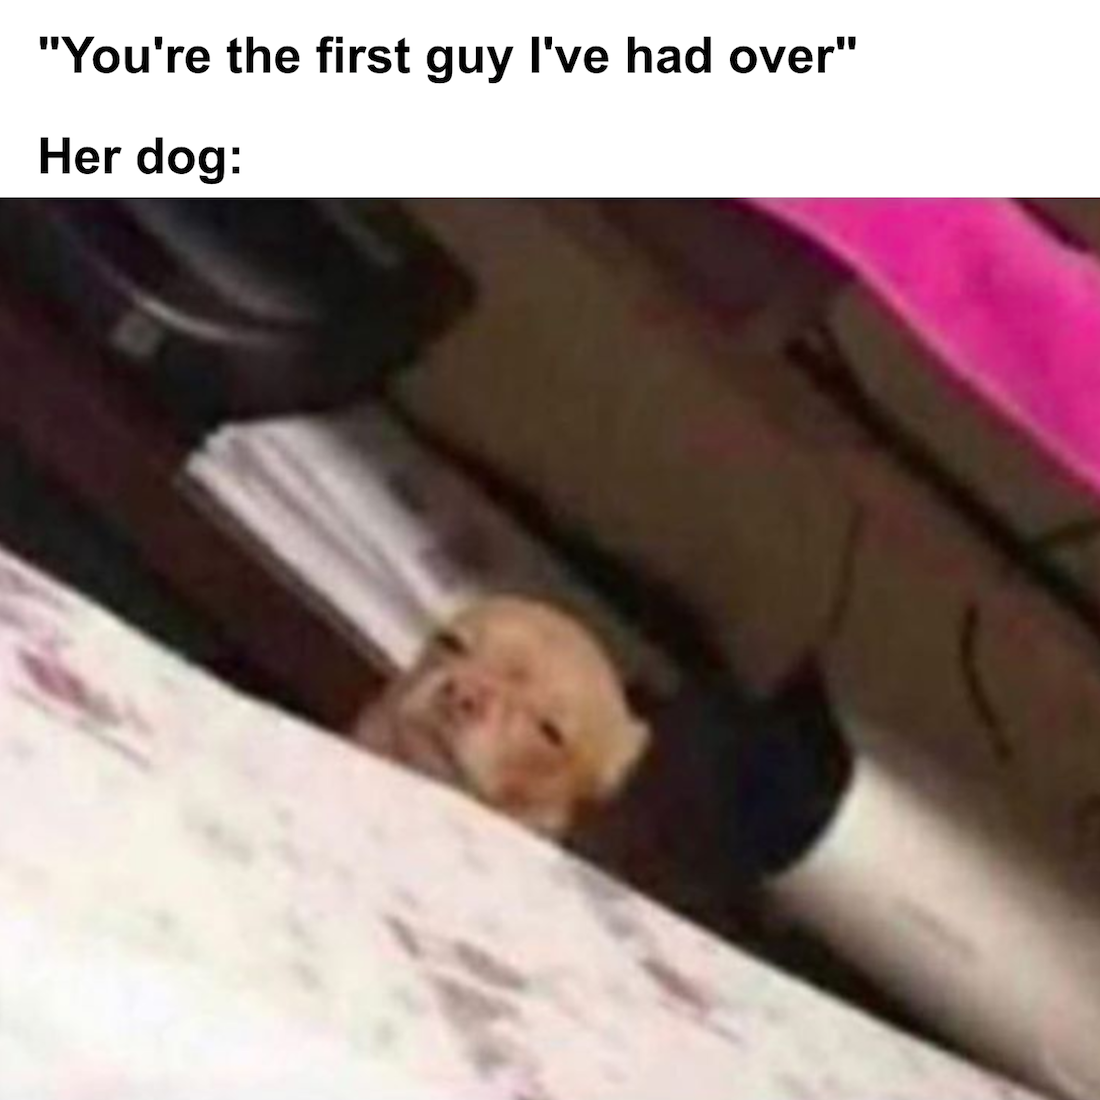 dank meme - "You're the first guy I've had over" Her dog